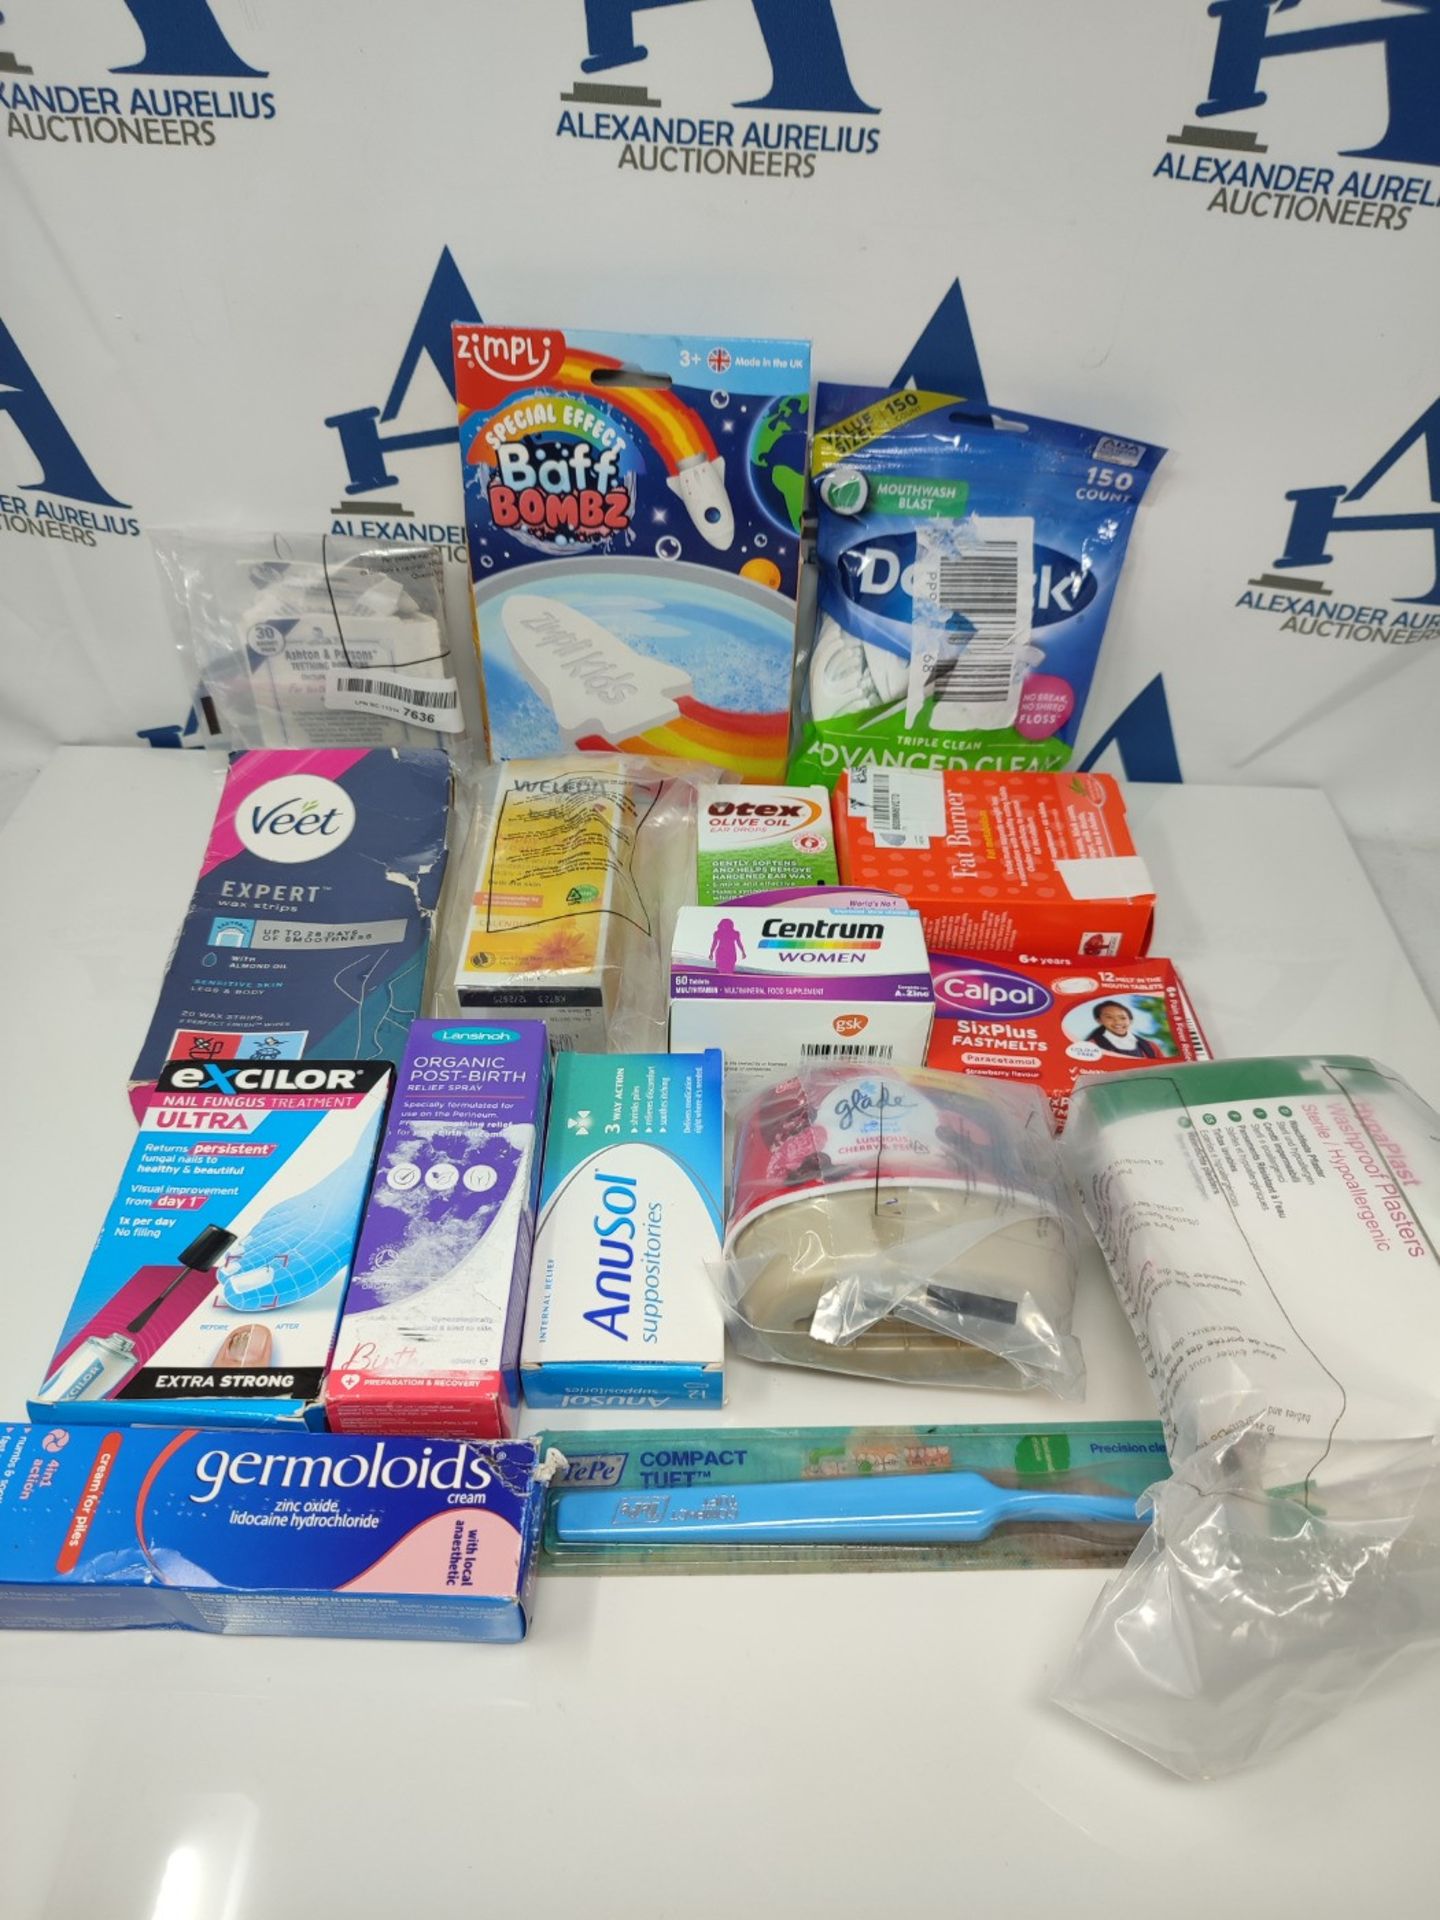 16 items of Pharmaceutical products and personal care: Glade, Otex, Lasinoh, Veet and